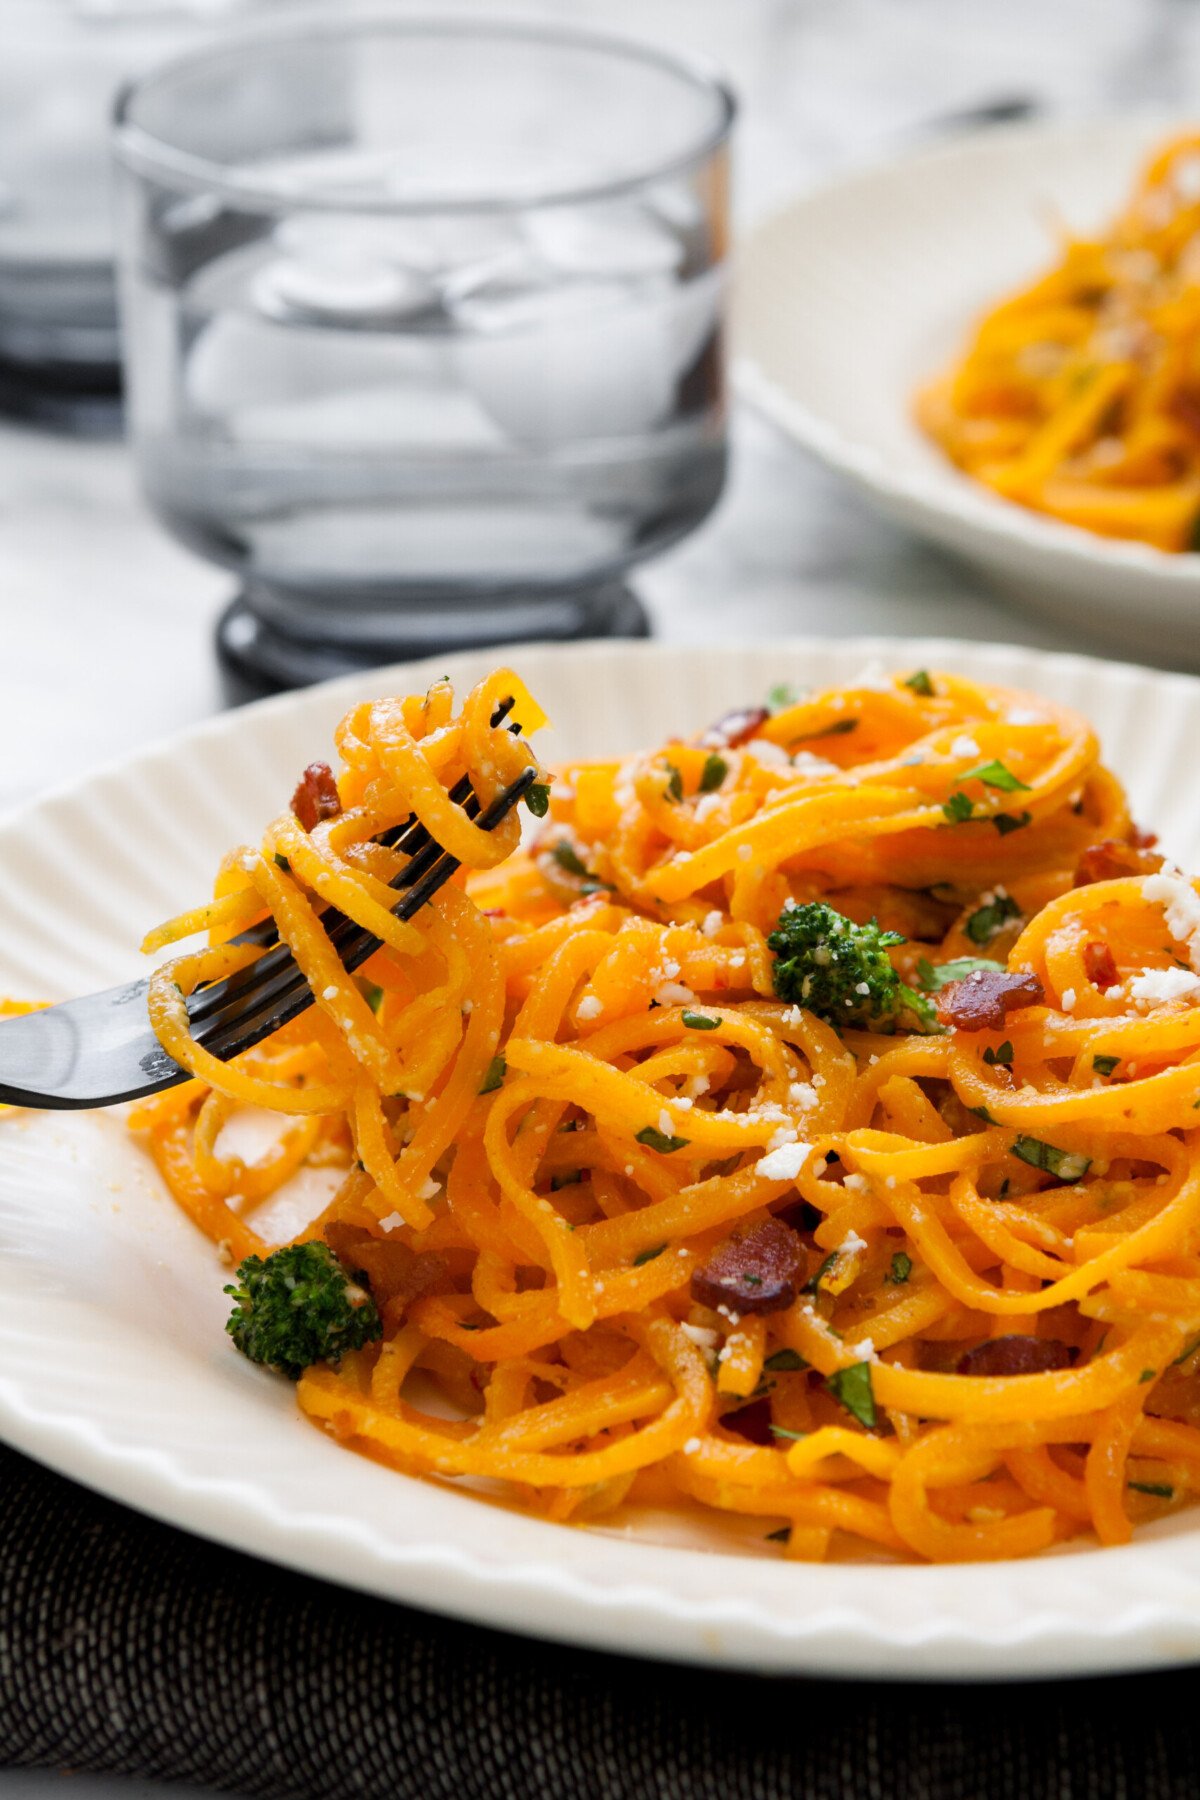 Butternut squash noodles spun around a black fork with broccoli and bacon